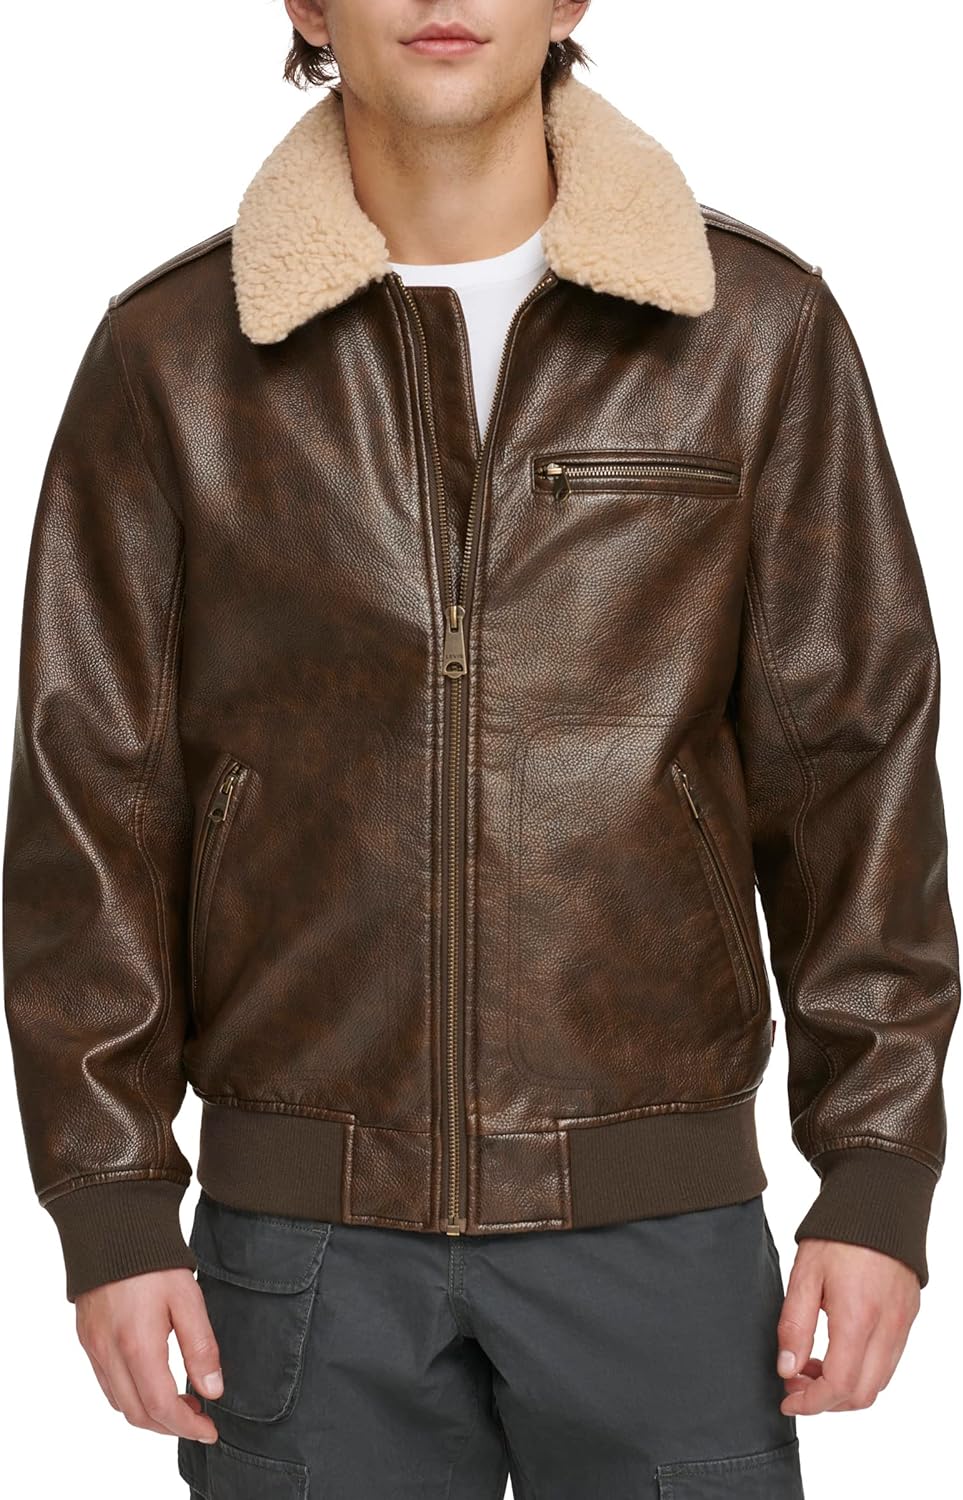 FLAVOR Men's Real Leather Bomber Jacket with Removable Fur Collar